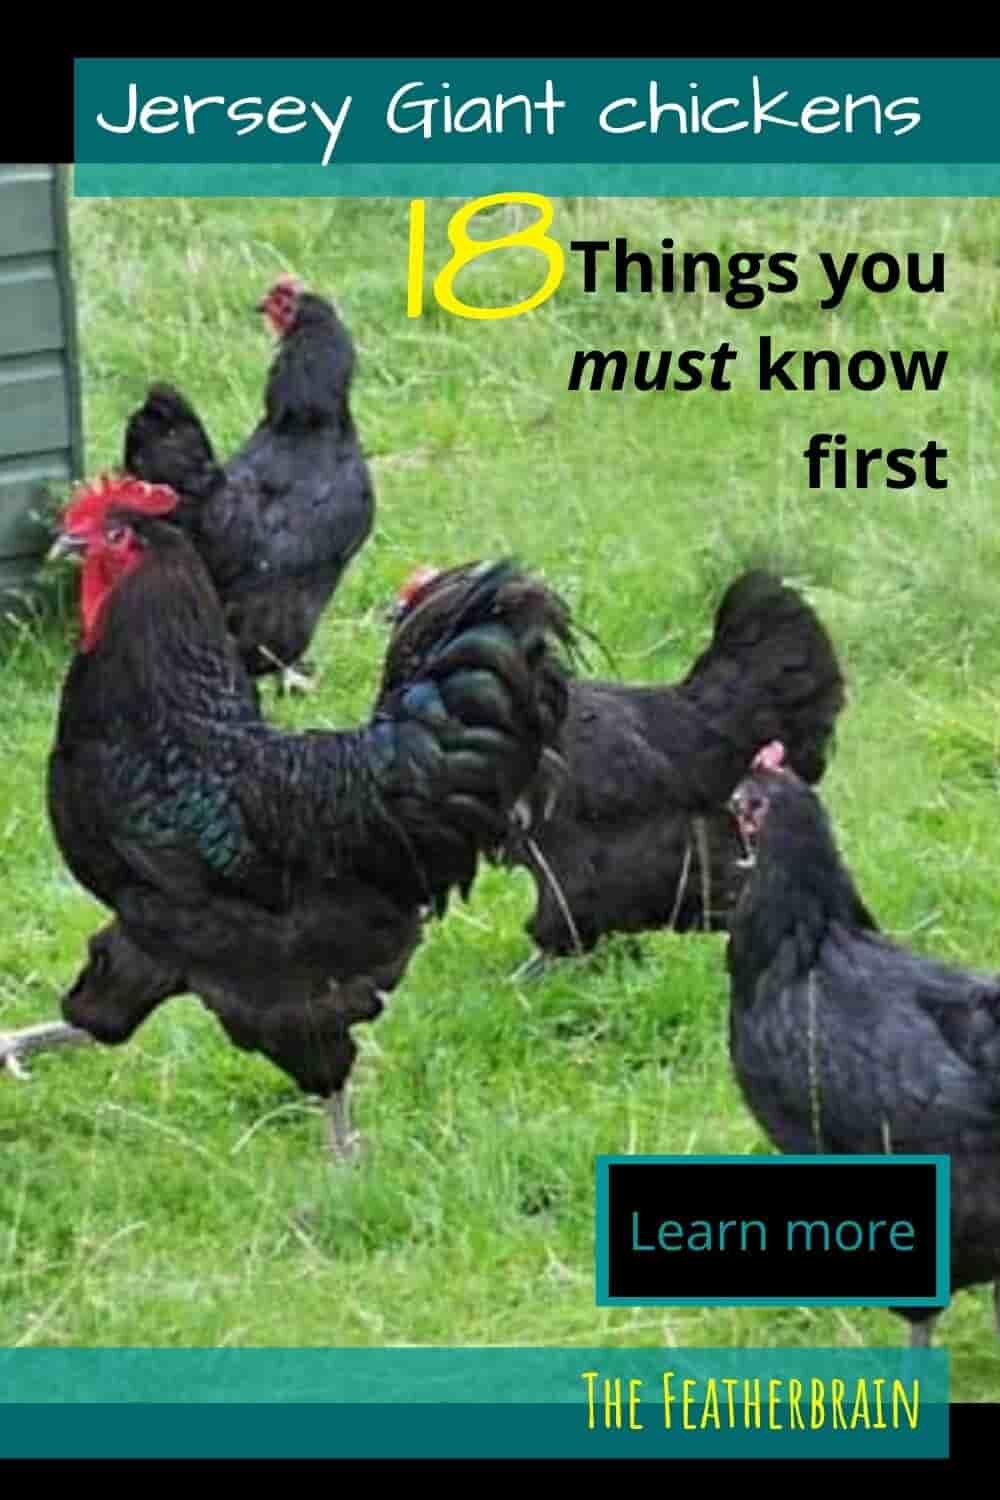 bladerdeeg Bermad Monumentaal Considering Jersey Giant chickens? The 18 things you must know first — The  Featherbrain